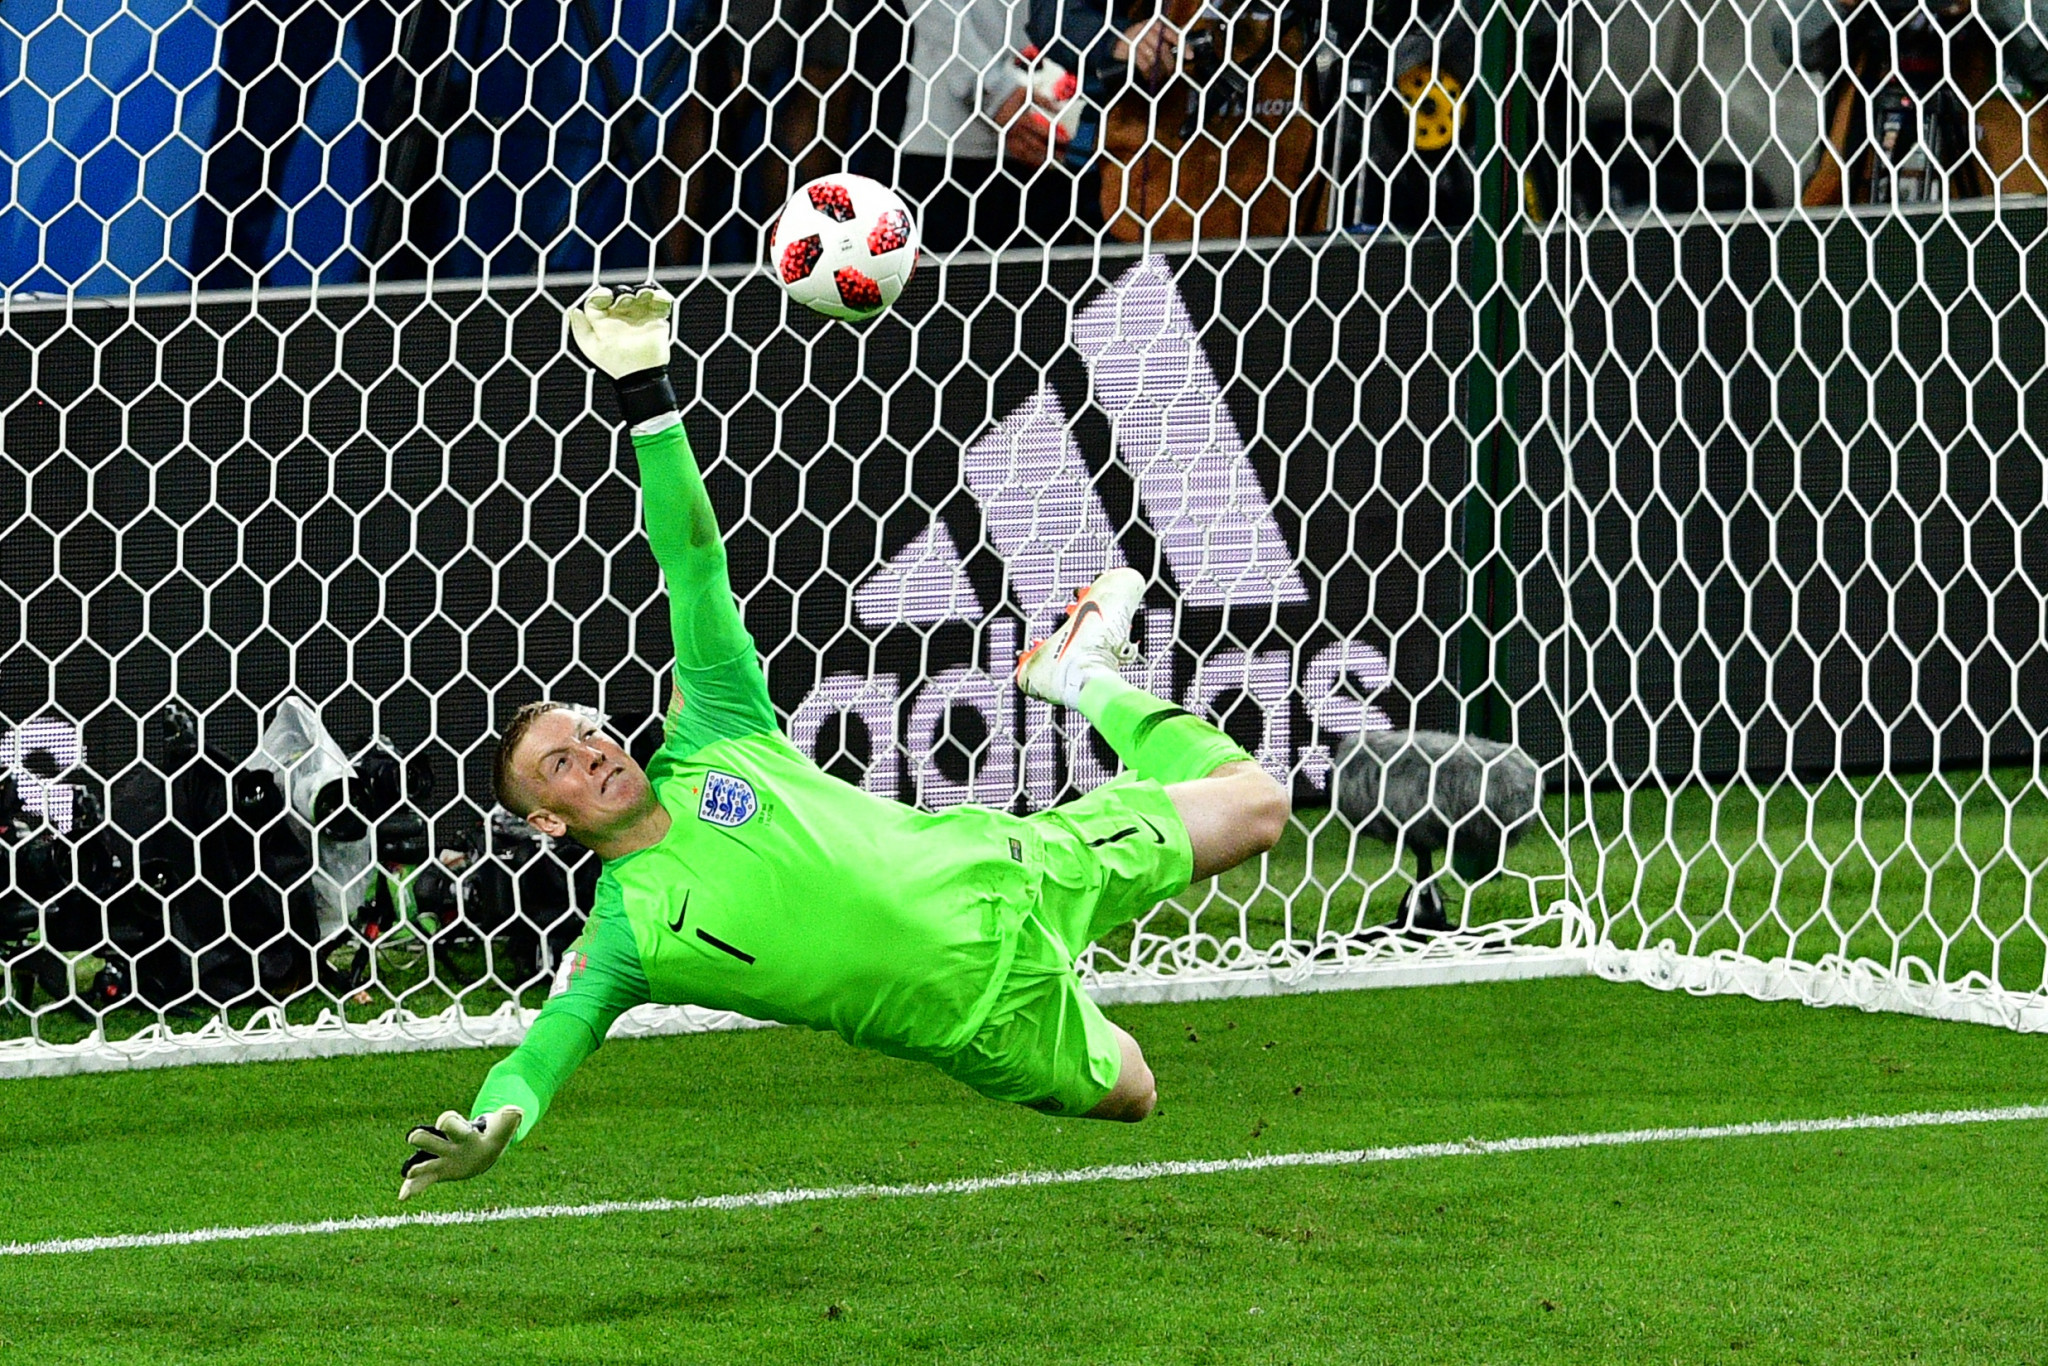 Jordan Pickford's save handed England the chance to win the dramatic last 16 encounter ©Getty Images